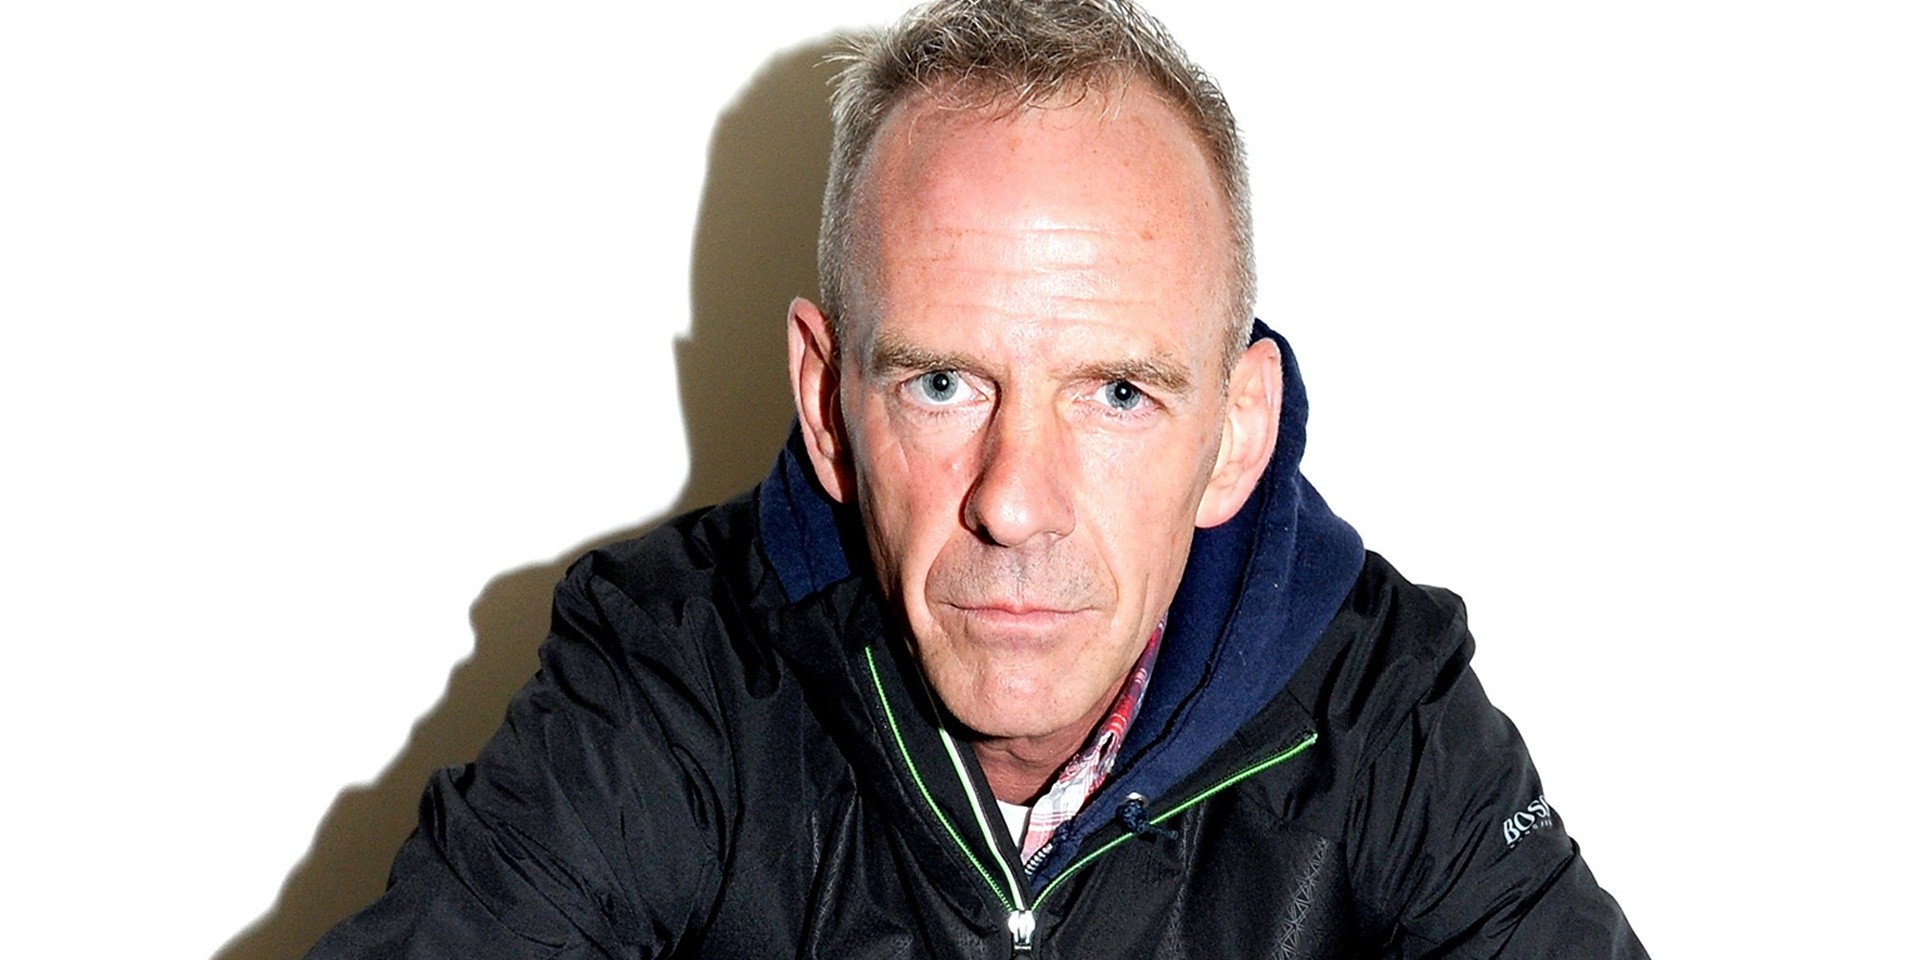 Fatboy Slim is coming back to Manila this April